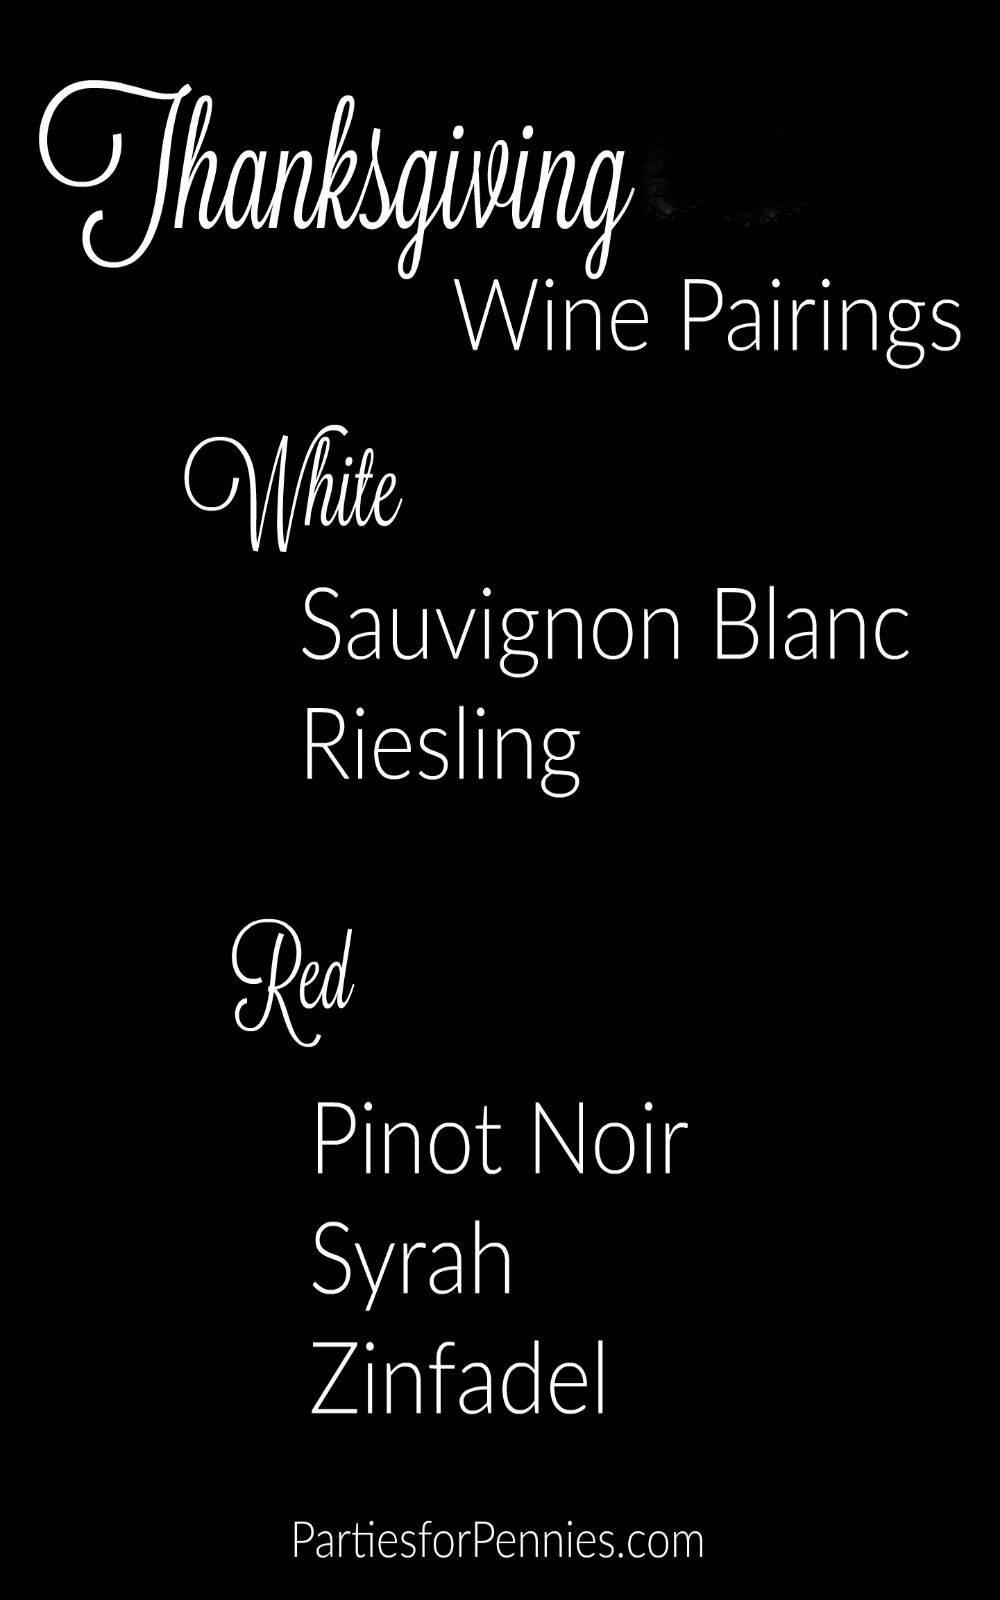 Thanksgiving Wine Pairings | PartiesforPennies.com | What type of wine to serve for Thanksgiving. 